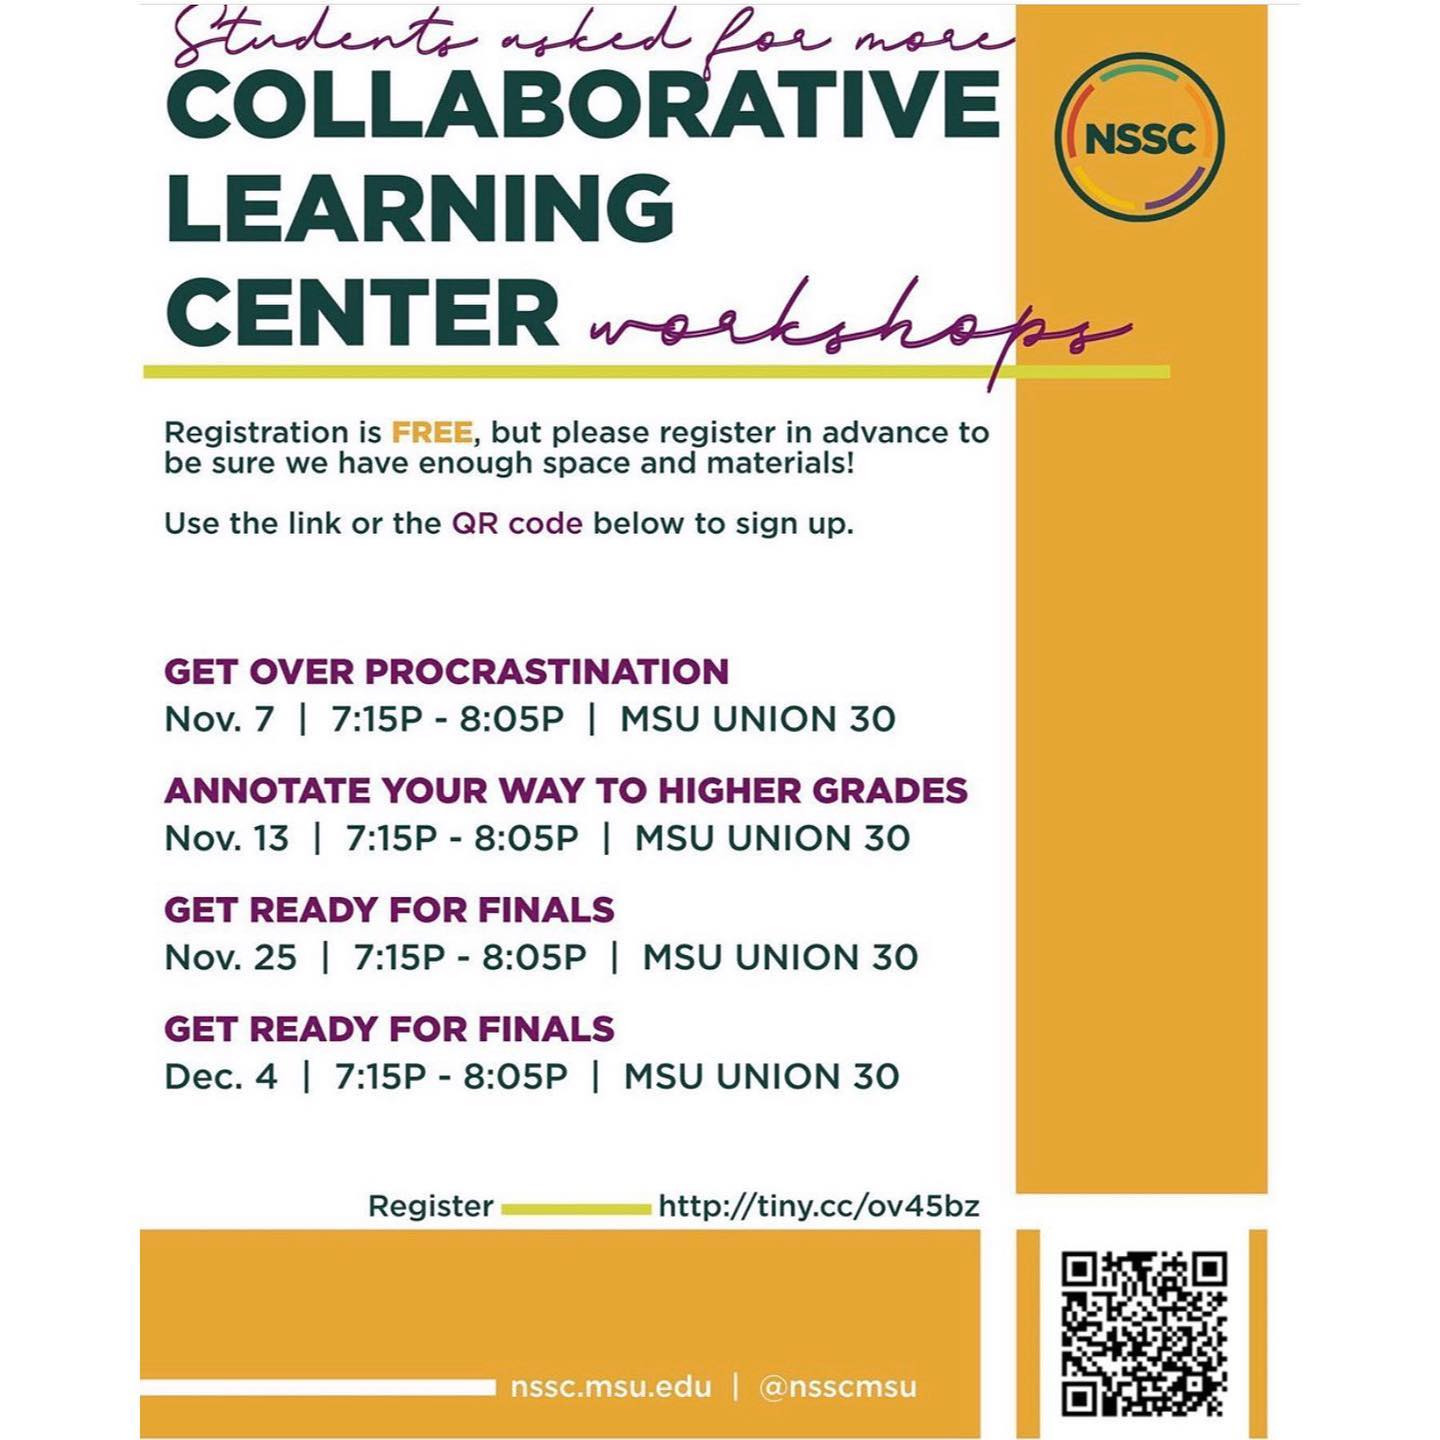 NSSC Get Ready For Finals- Collaborative Learning Center Workshop